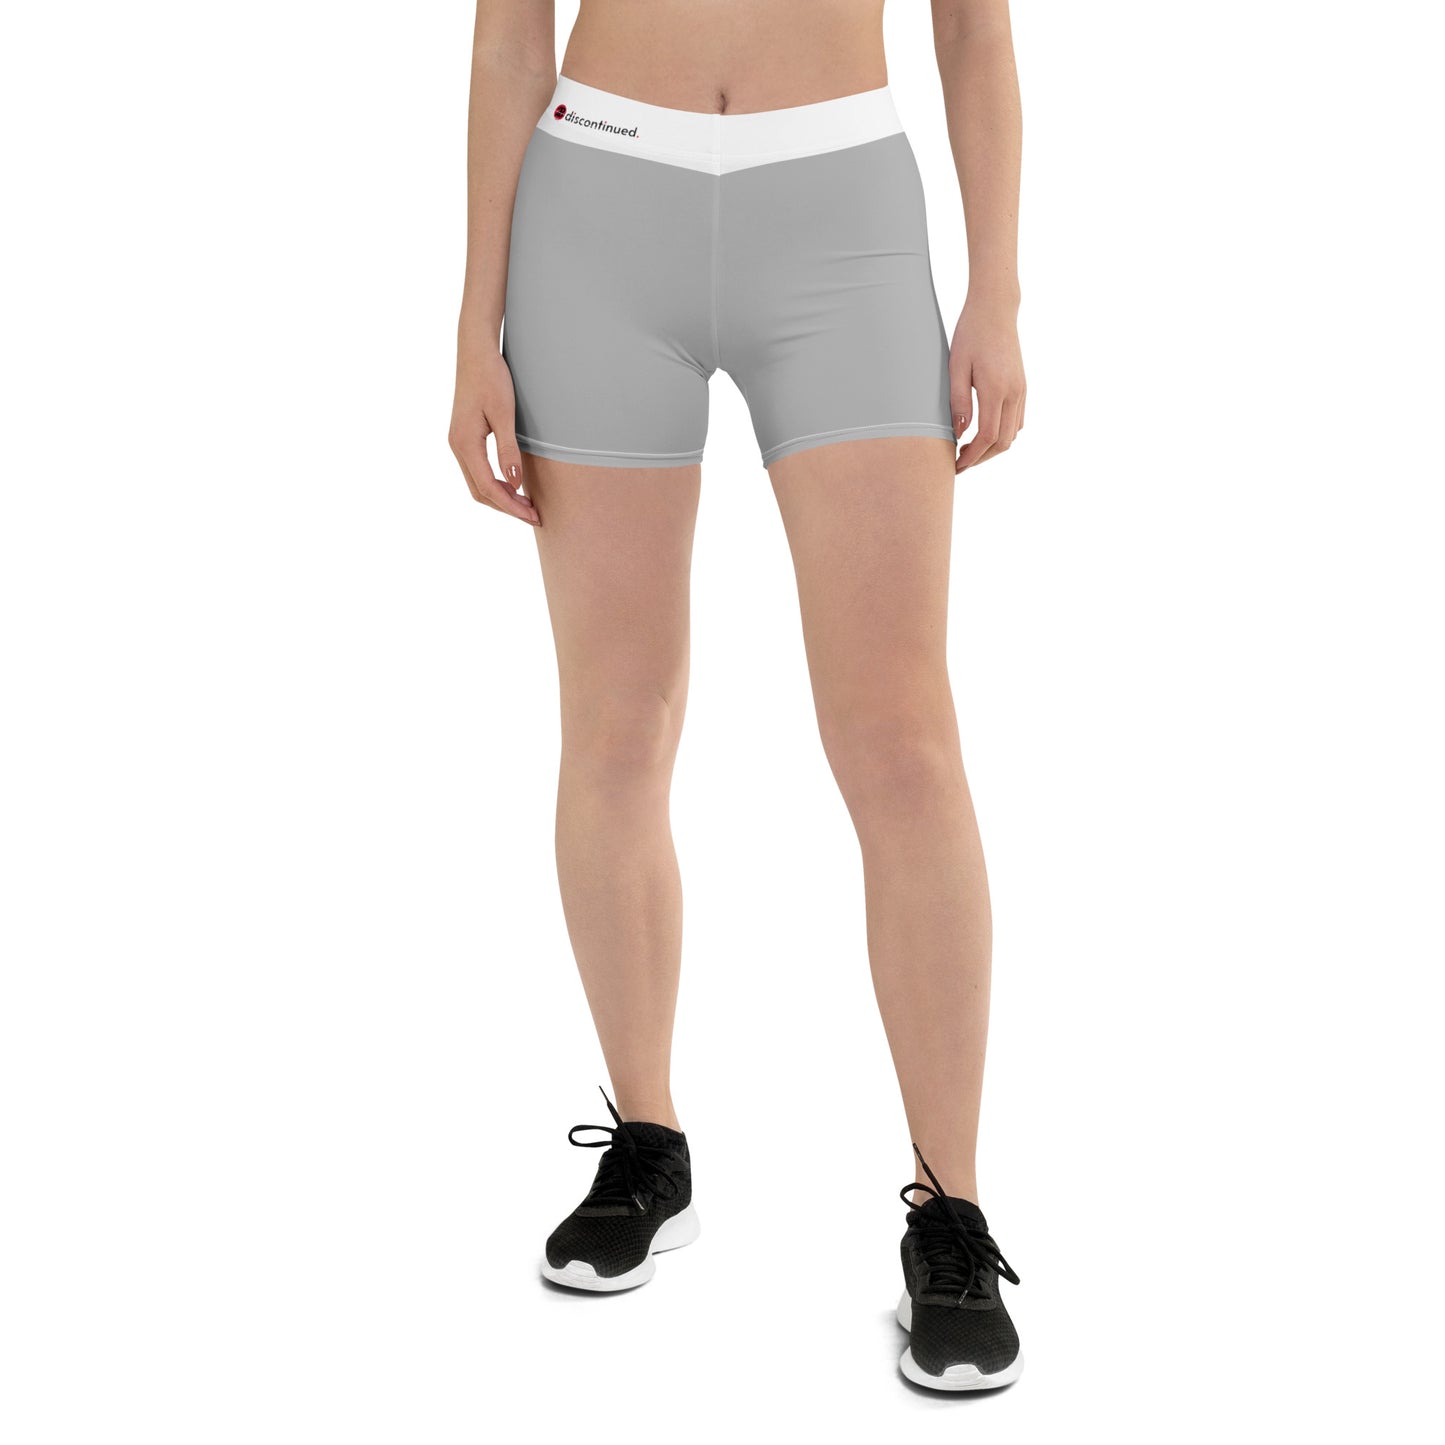 2Bdiscontinued. women's athletic shorts lhtgry